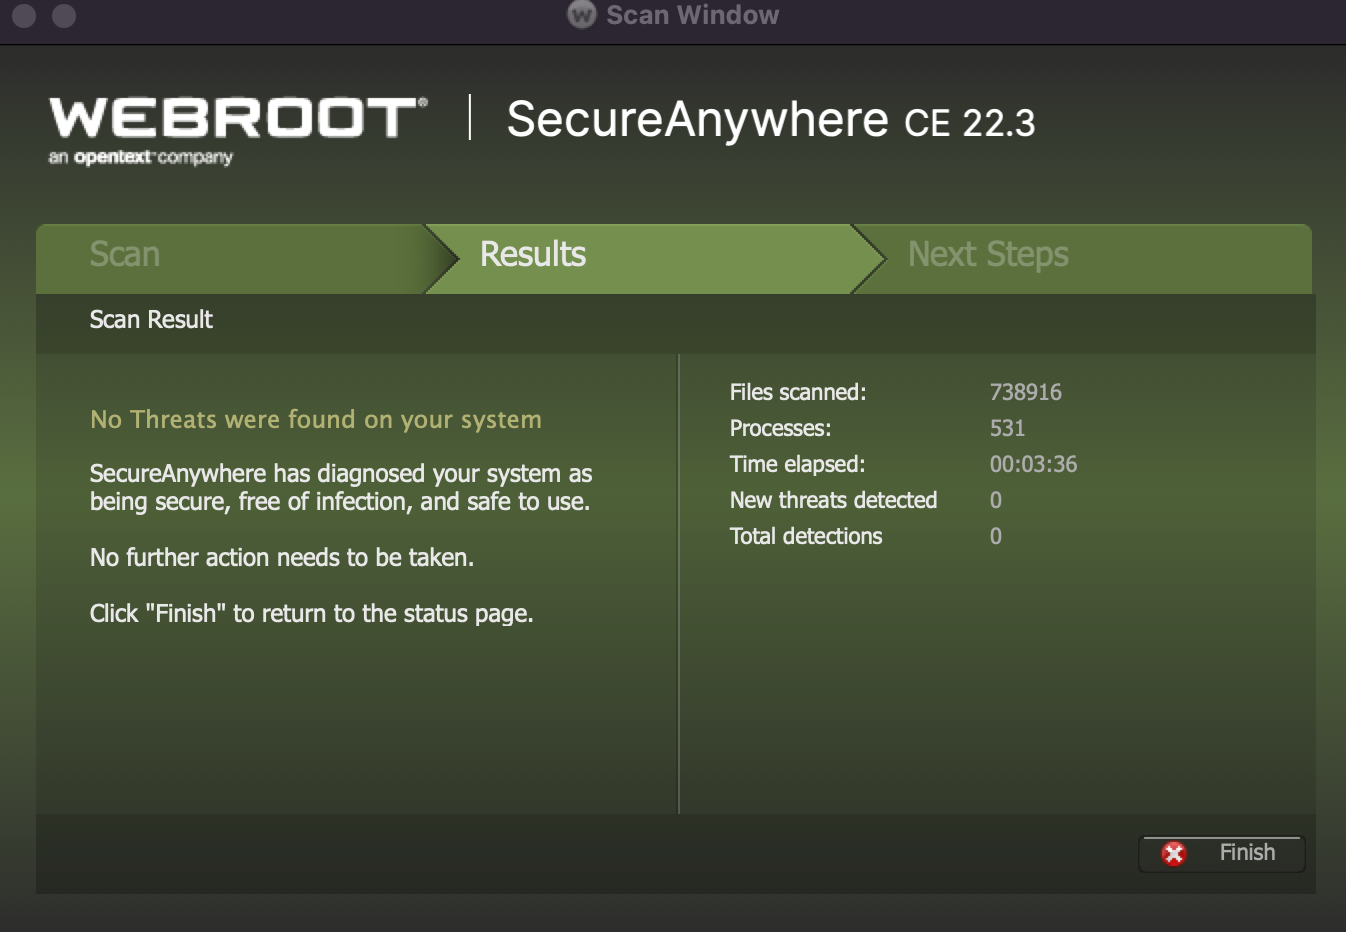 A screenshot of the Webroot SecureAnywhere antivirus scan results, showing that a scan of about 738,000 files took 3 minutes and 36 seconds.